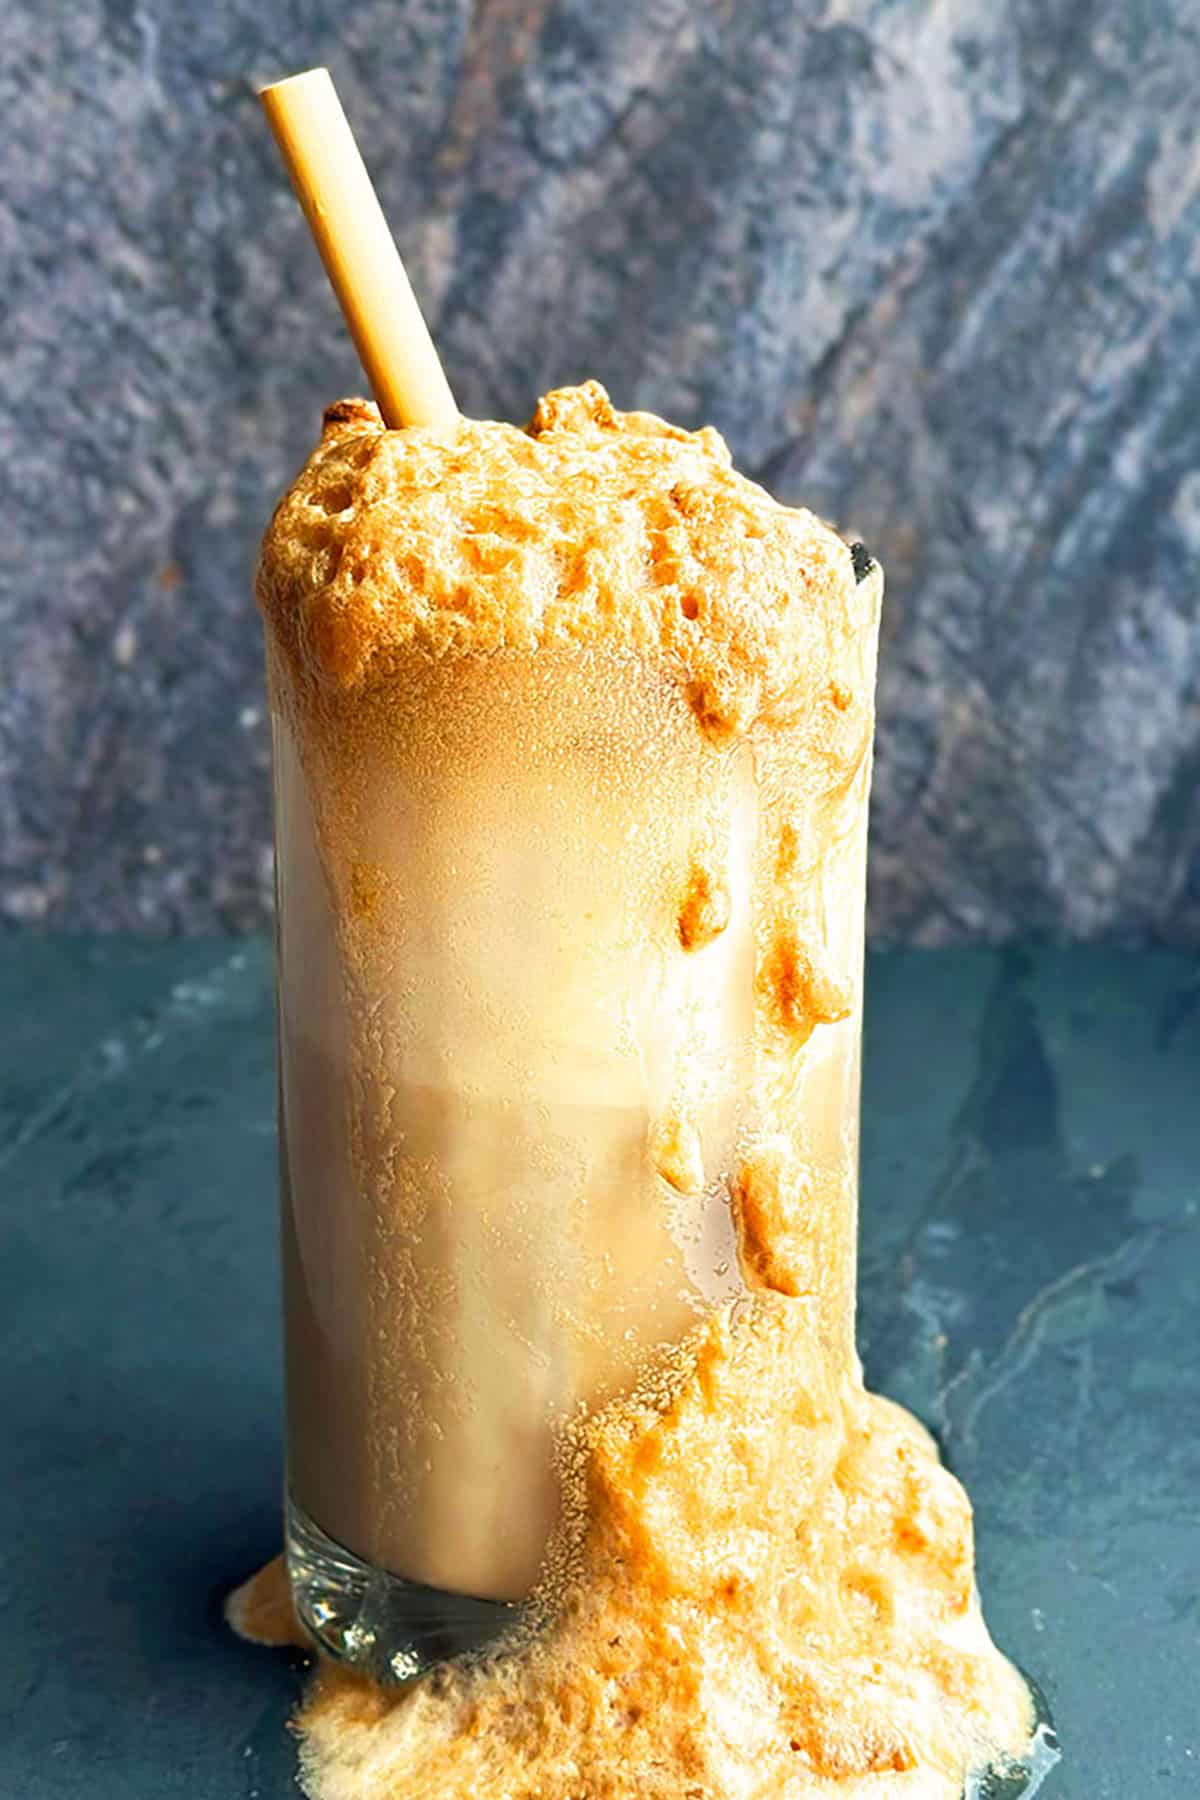 Homemade Root Beer Ice Cream Soda With Foams and Bubbles Flowing Out of Big Glass Mug  